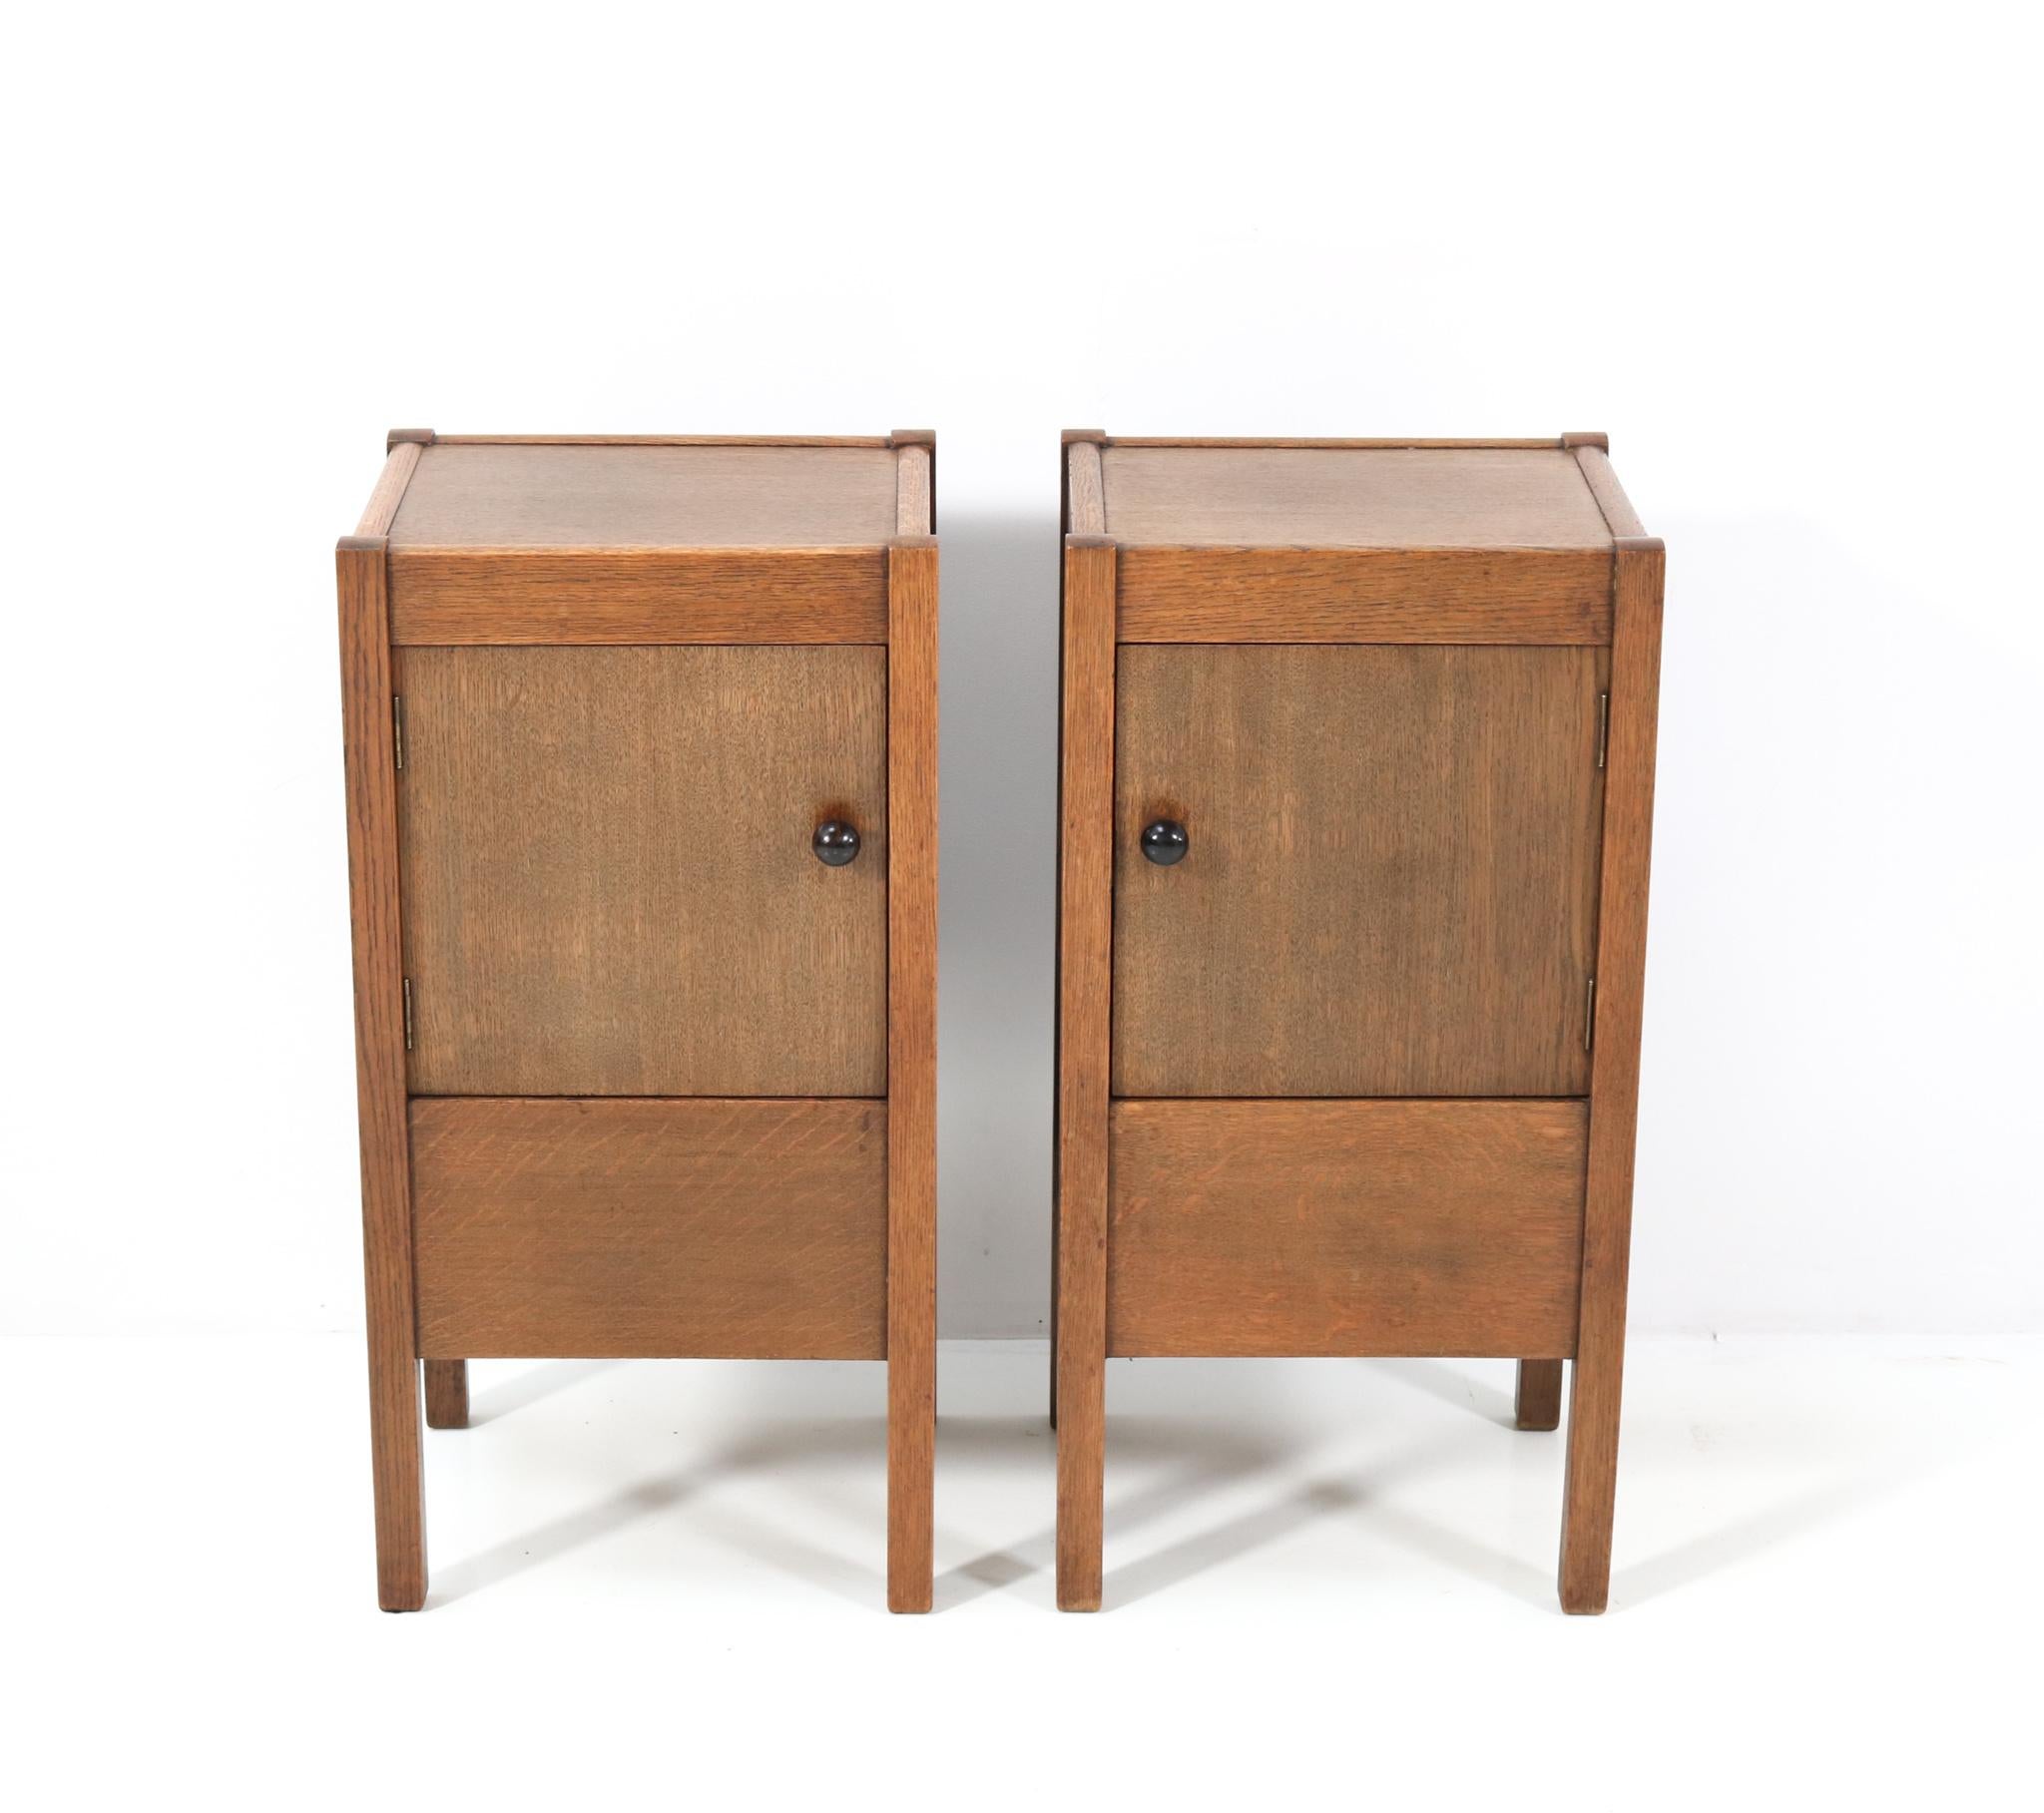 Magnificent and rare pair of Art Deco Haagse School nightstands or bedside tables.
Design by J.A. Muntendam for L.O.V. Oosterbeek.
Striking Dutch design from the 1920s.
Solid oak with original solid macassar ebony knobs on the doors.
Marked with